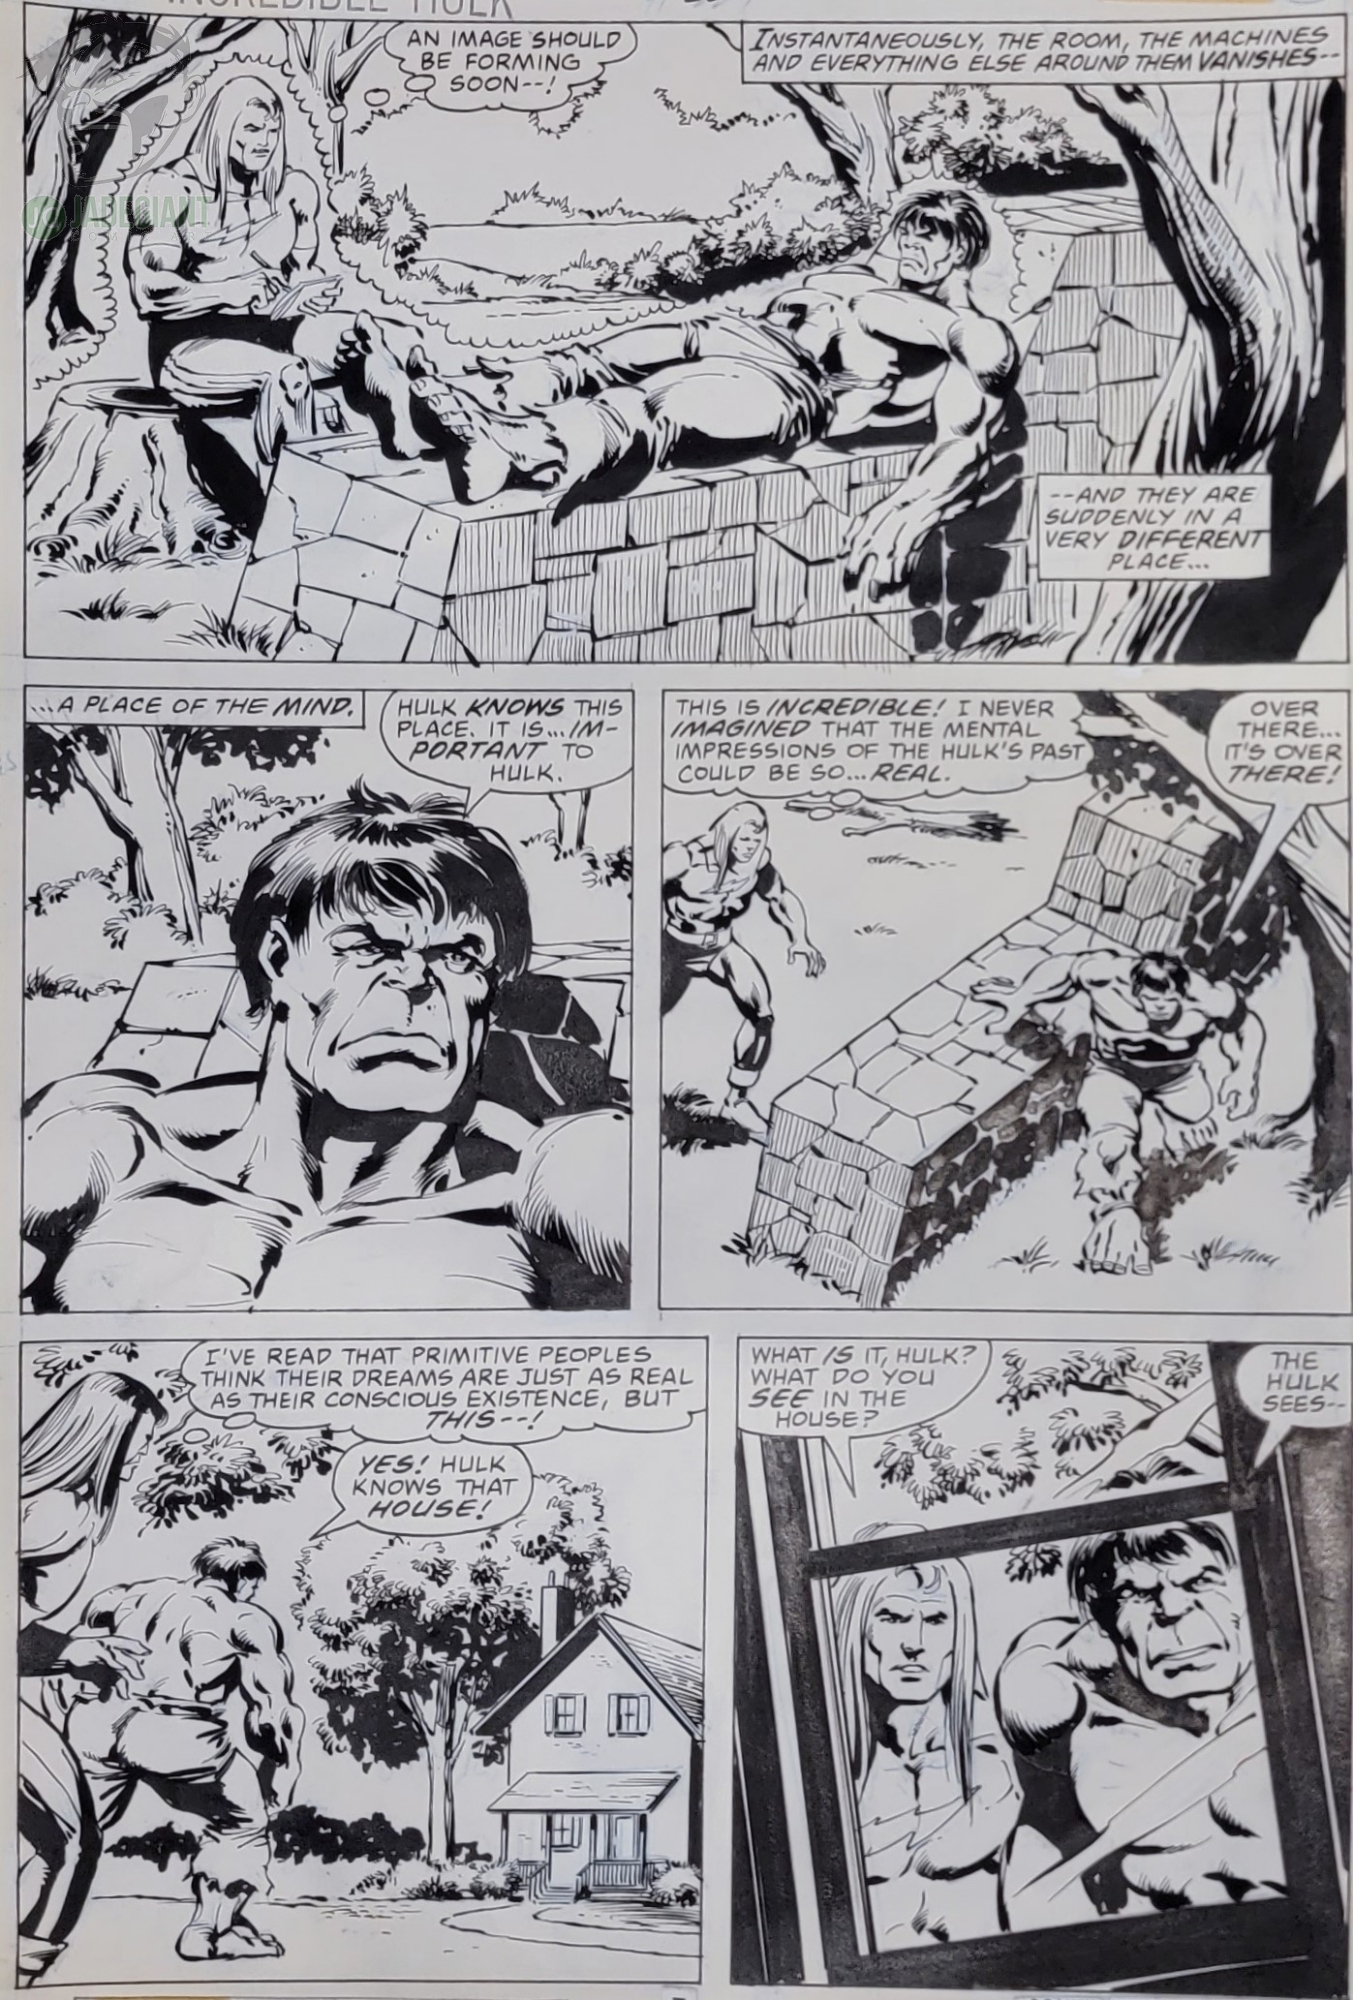 1978 Incredible Hulk 227 page 7 by Sal Buscema and Klaus Janson (looking for more issue 227 pages) Comic Art